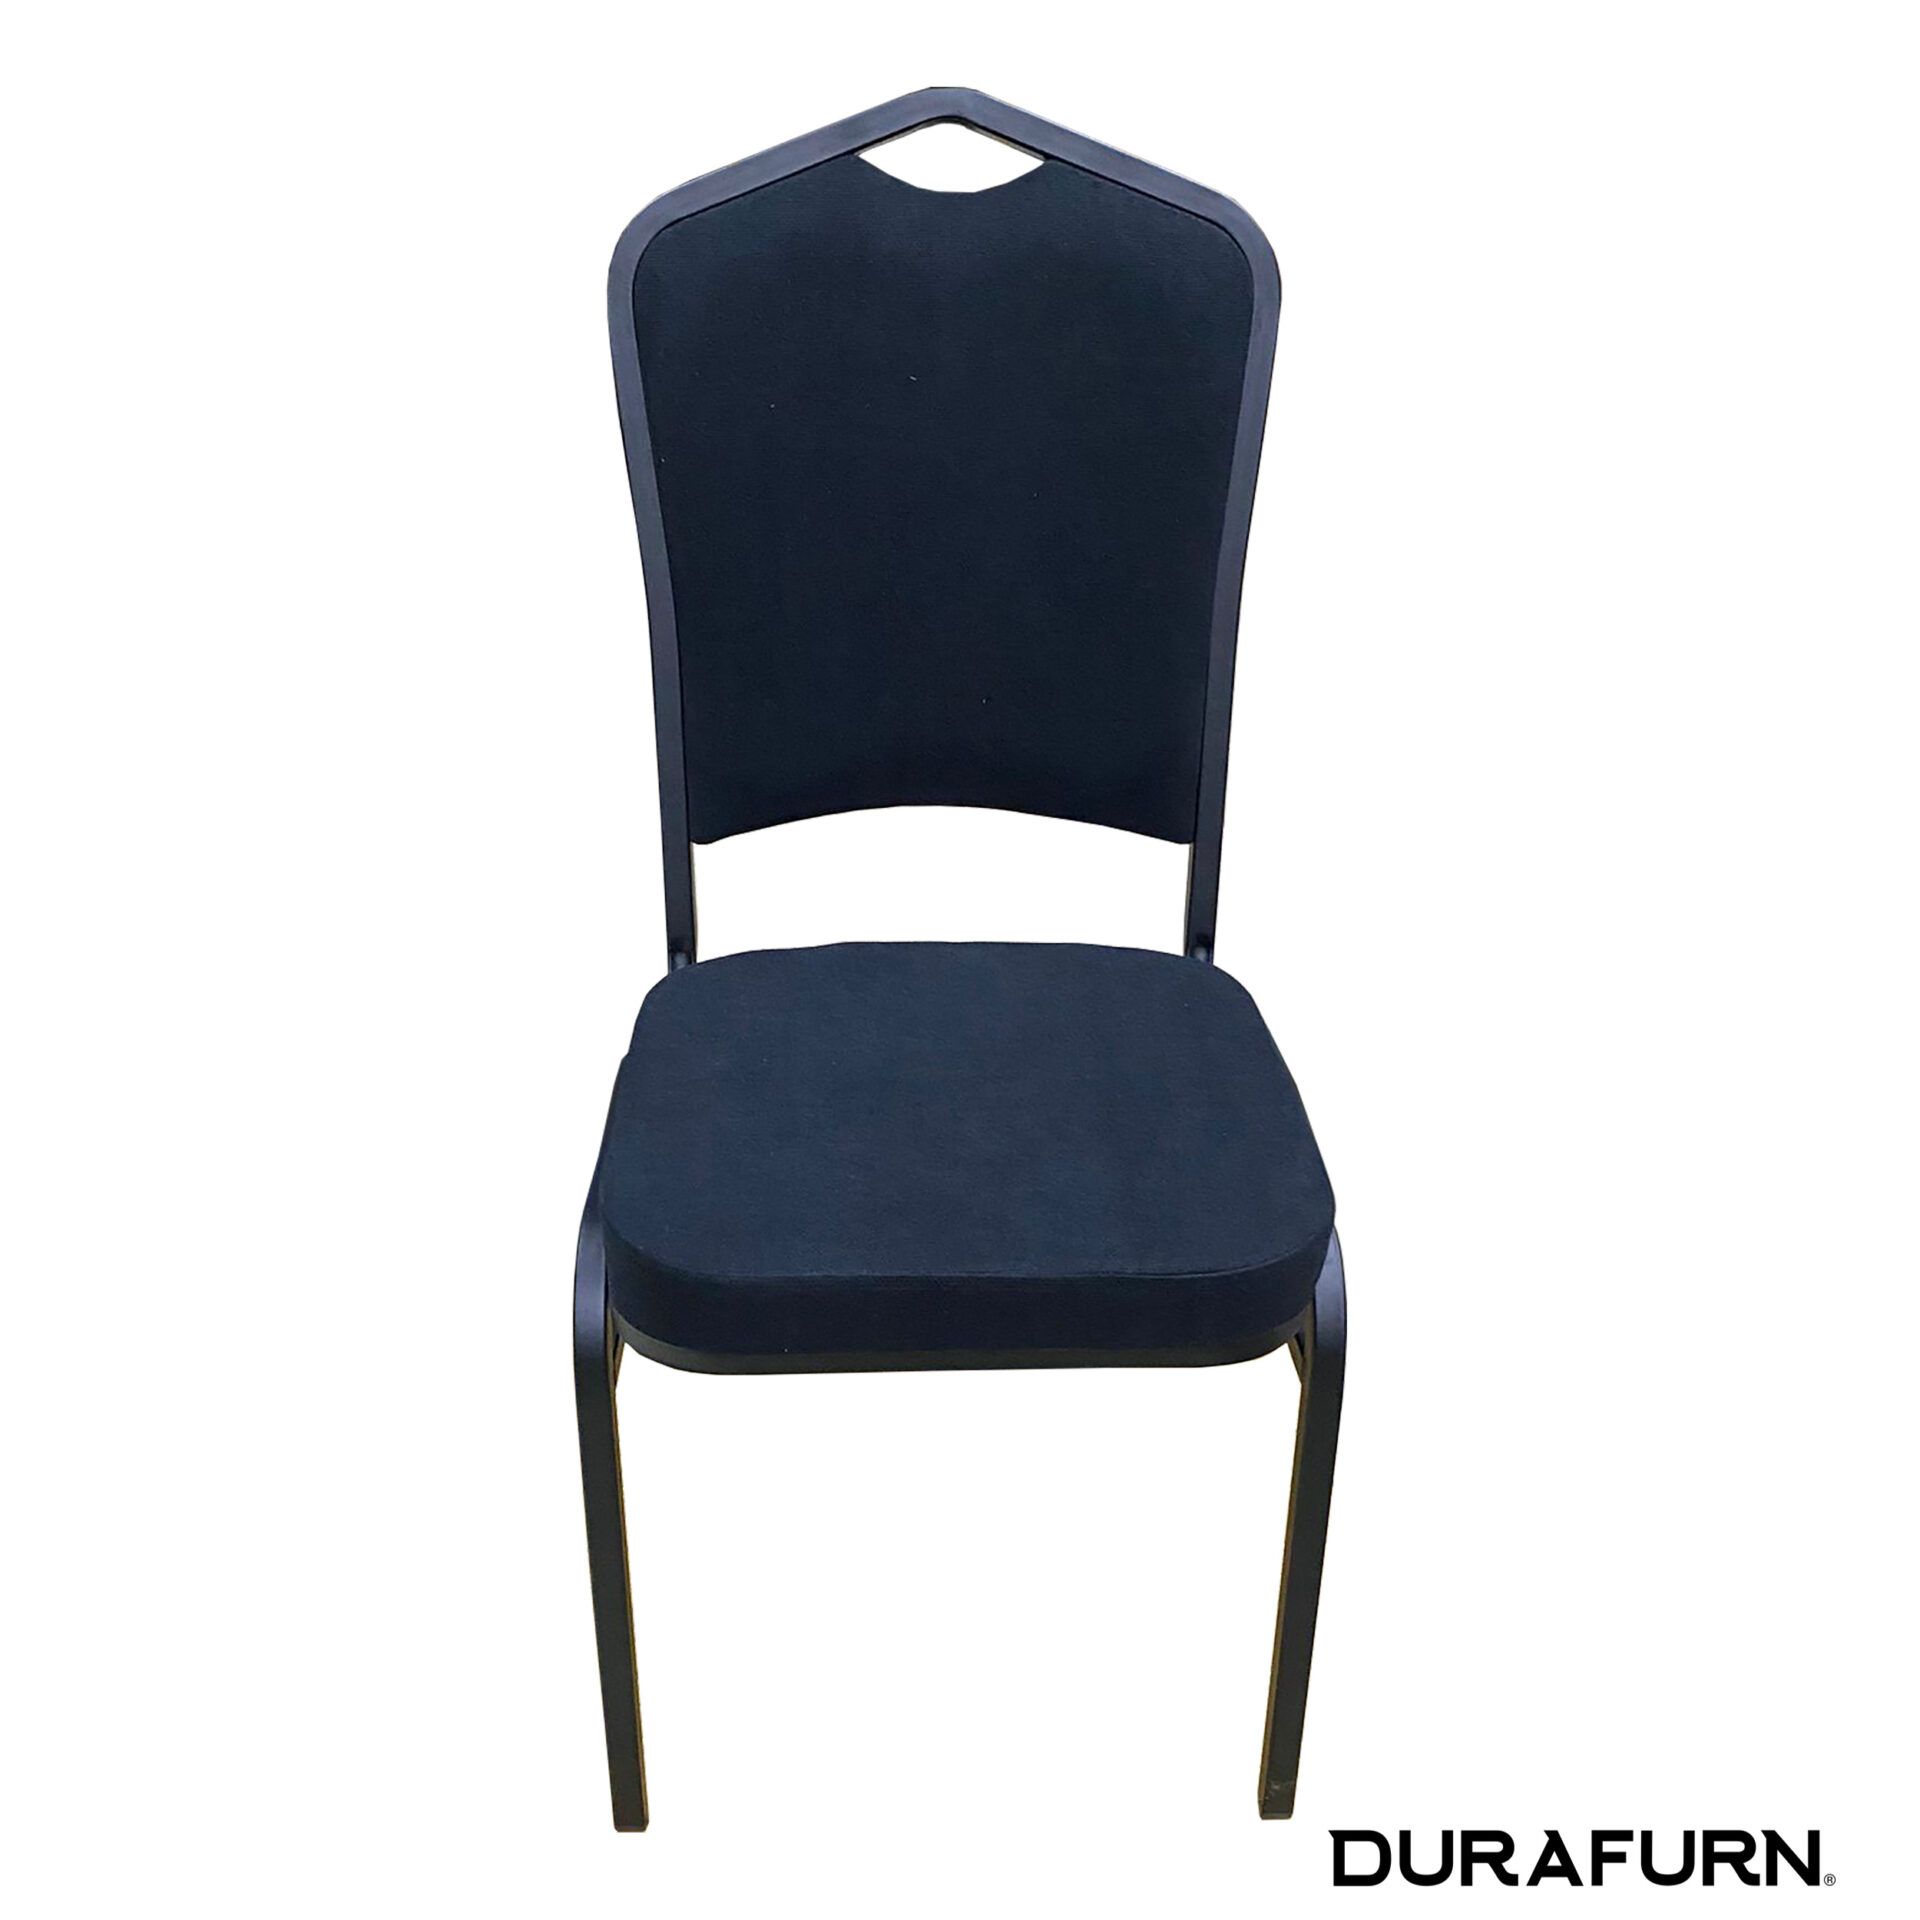 Function Chair Image 3